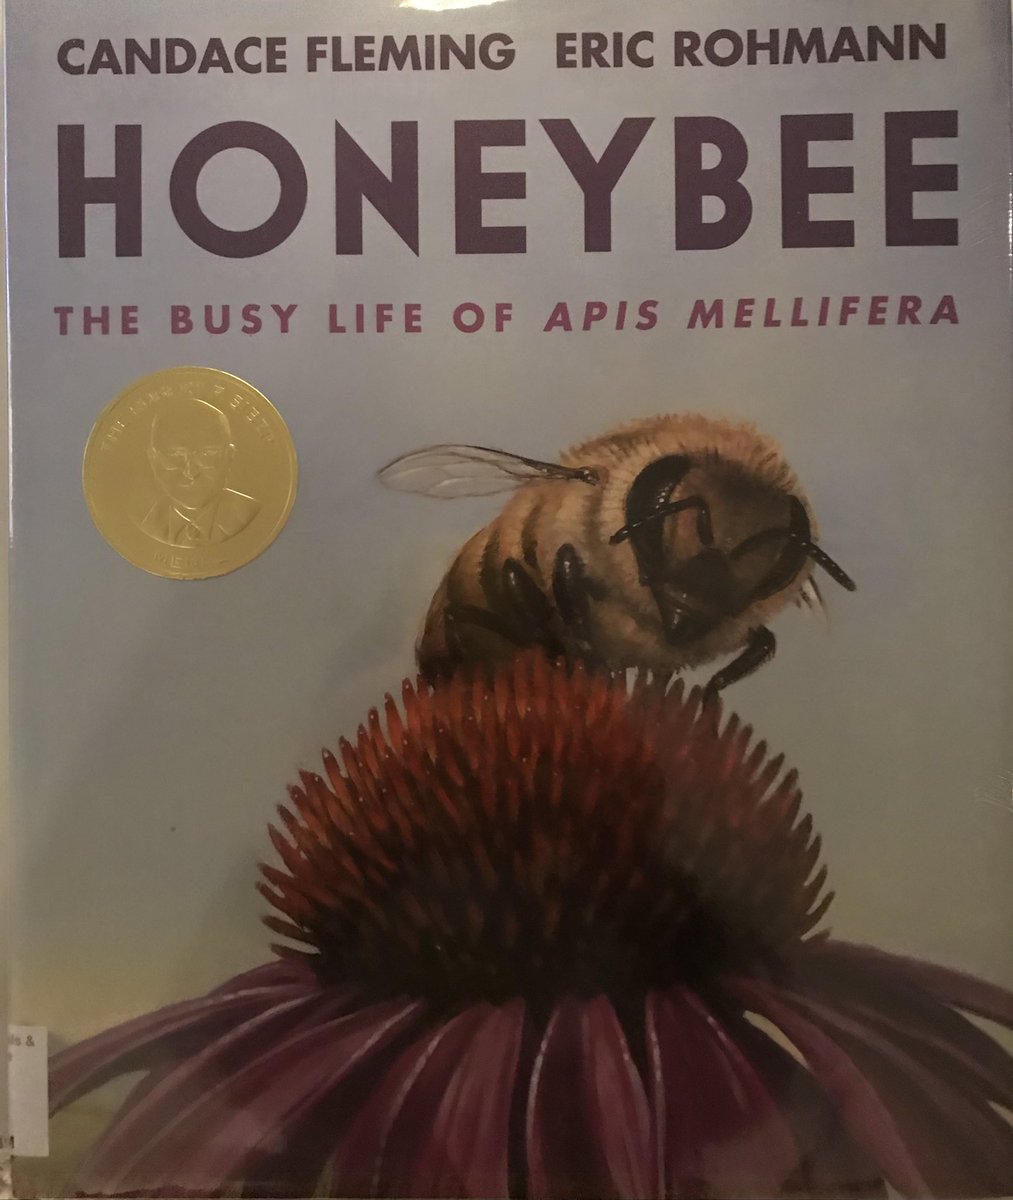 This stunning book made me love and admire Apis Mellifera. Everyone should read this captivating story and give thanks to the honeybees.  @candacemfleming #ericrohmann #neilporterbooks @HolidayHouseBks